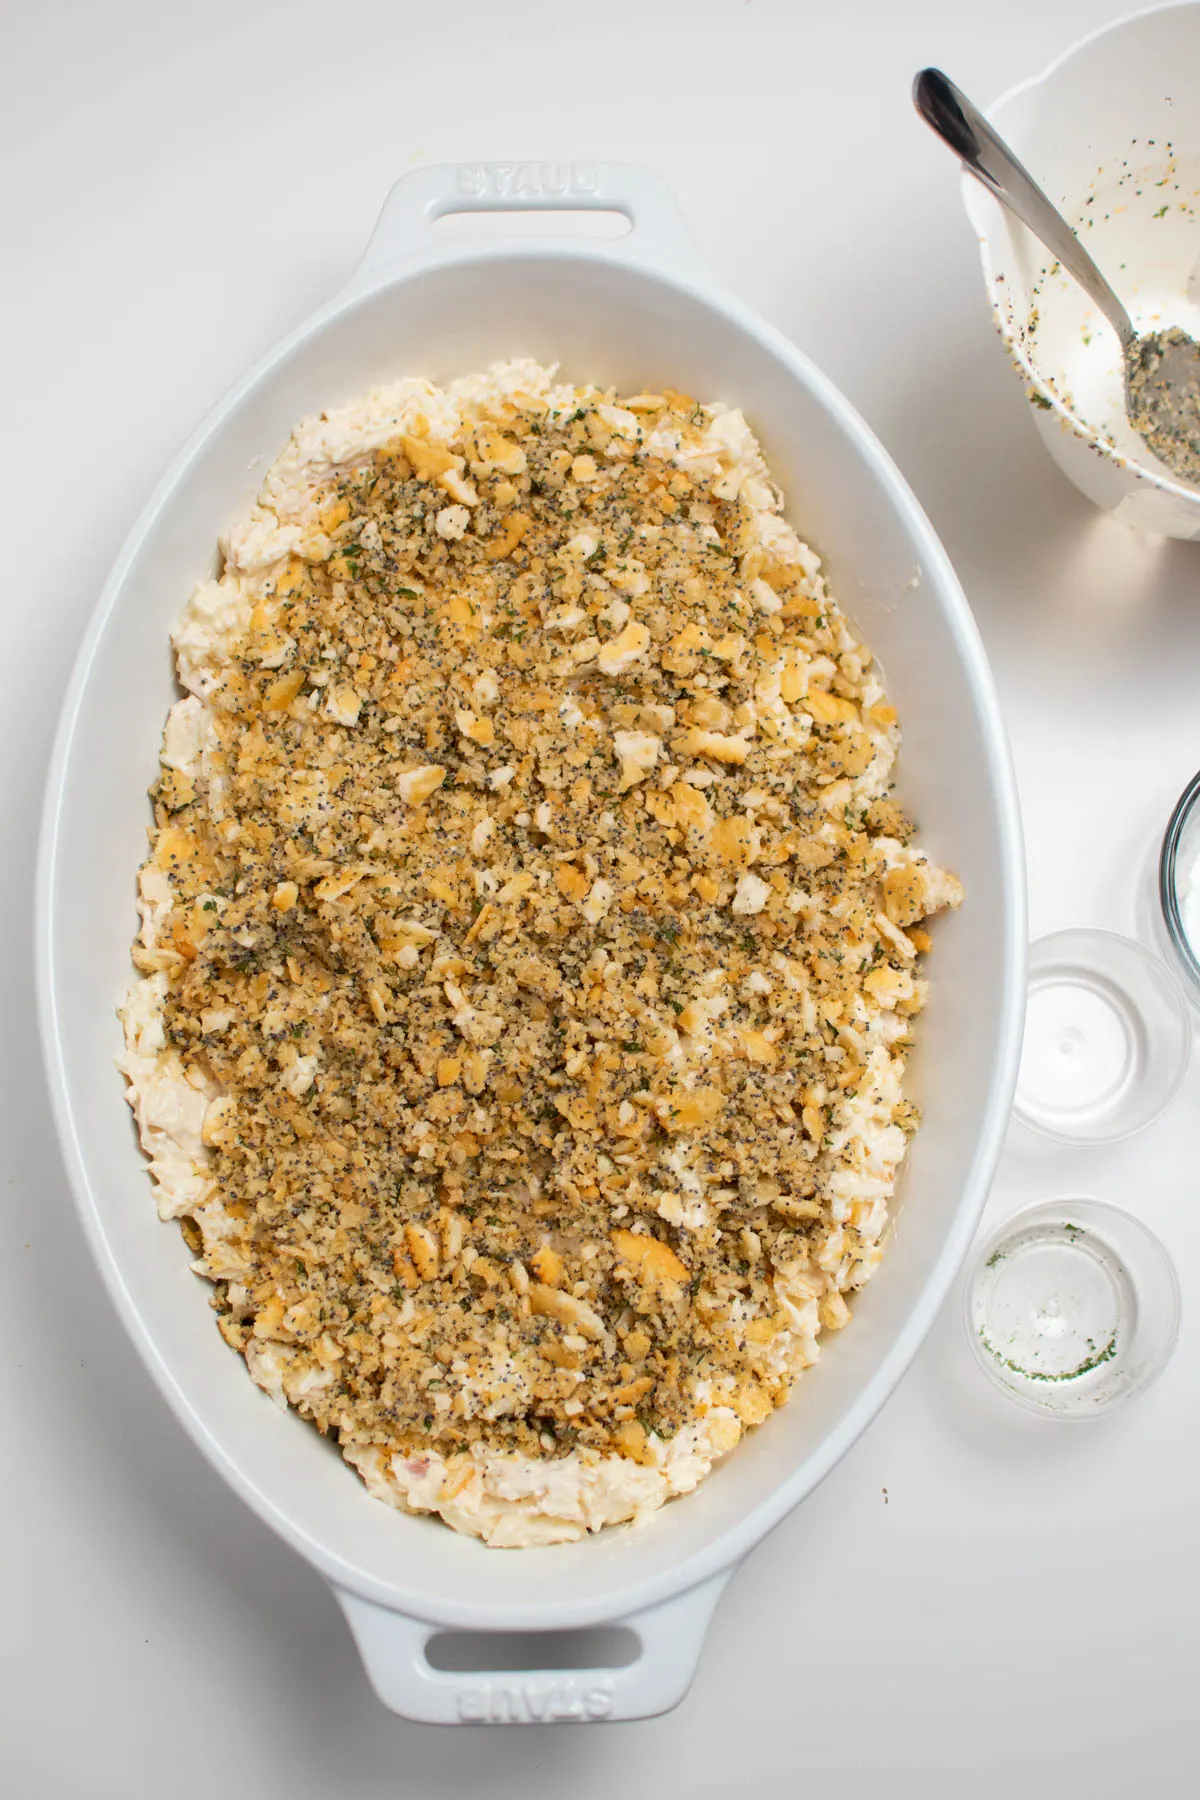 Unbaked chicken poppy seed casserole in white baking dish on white table.